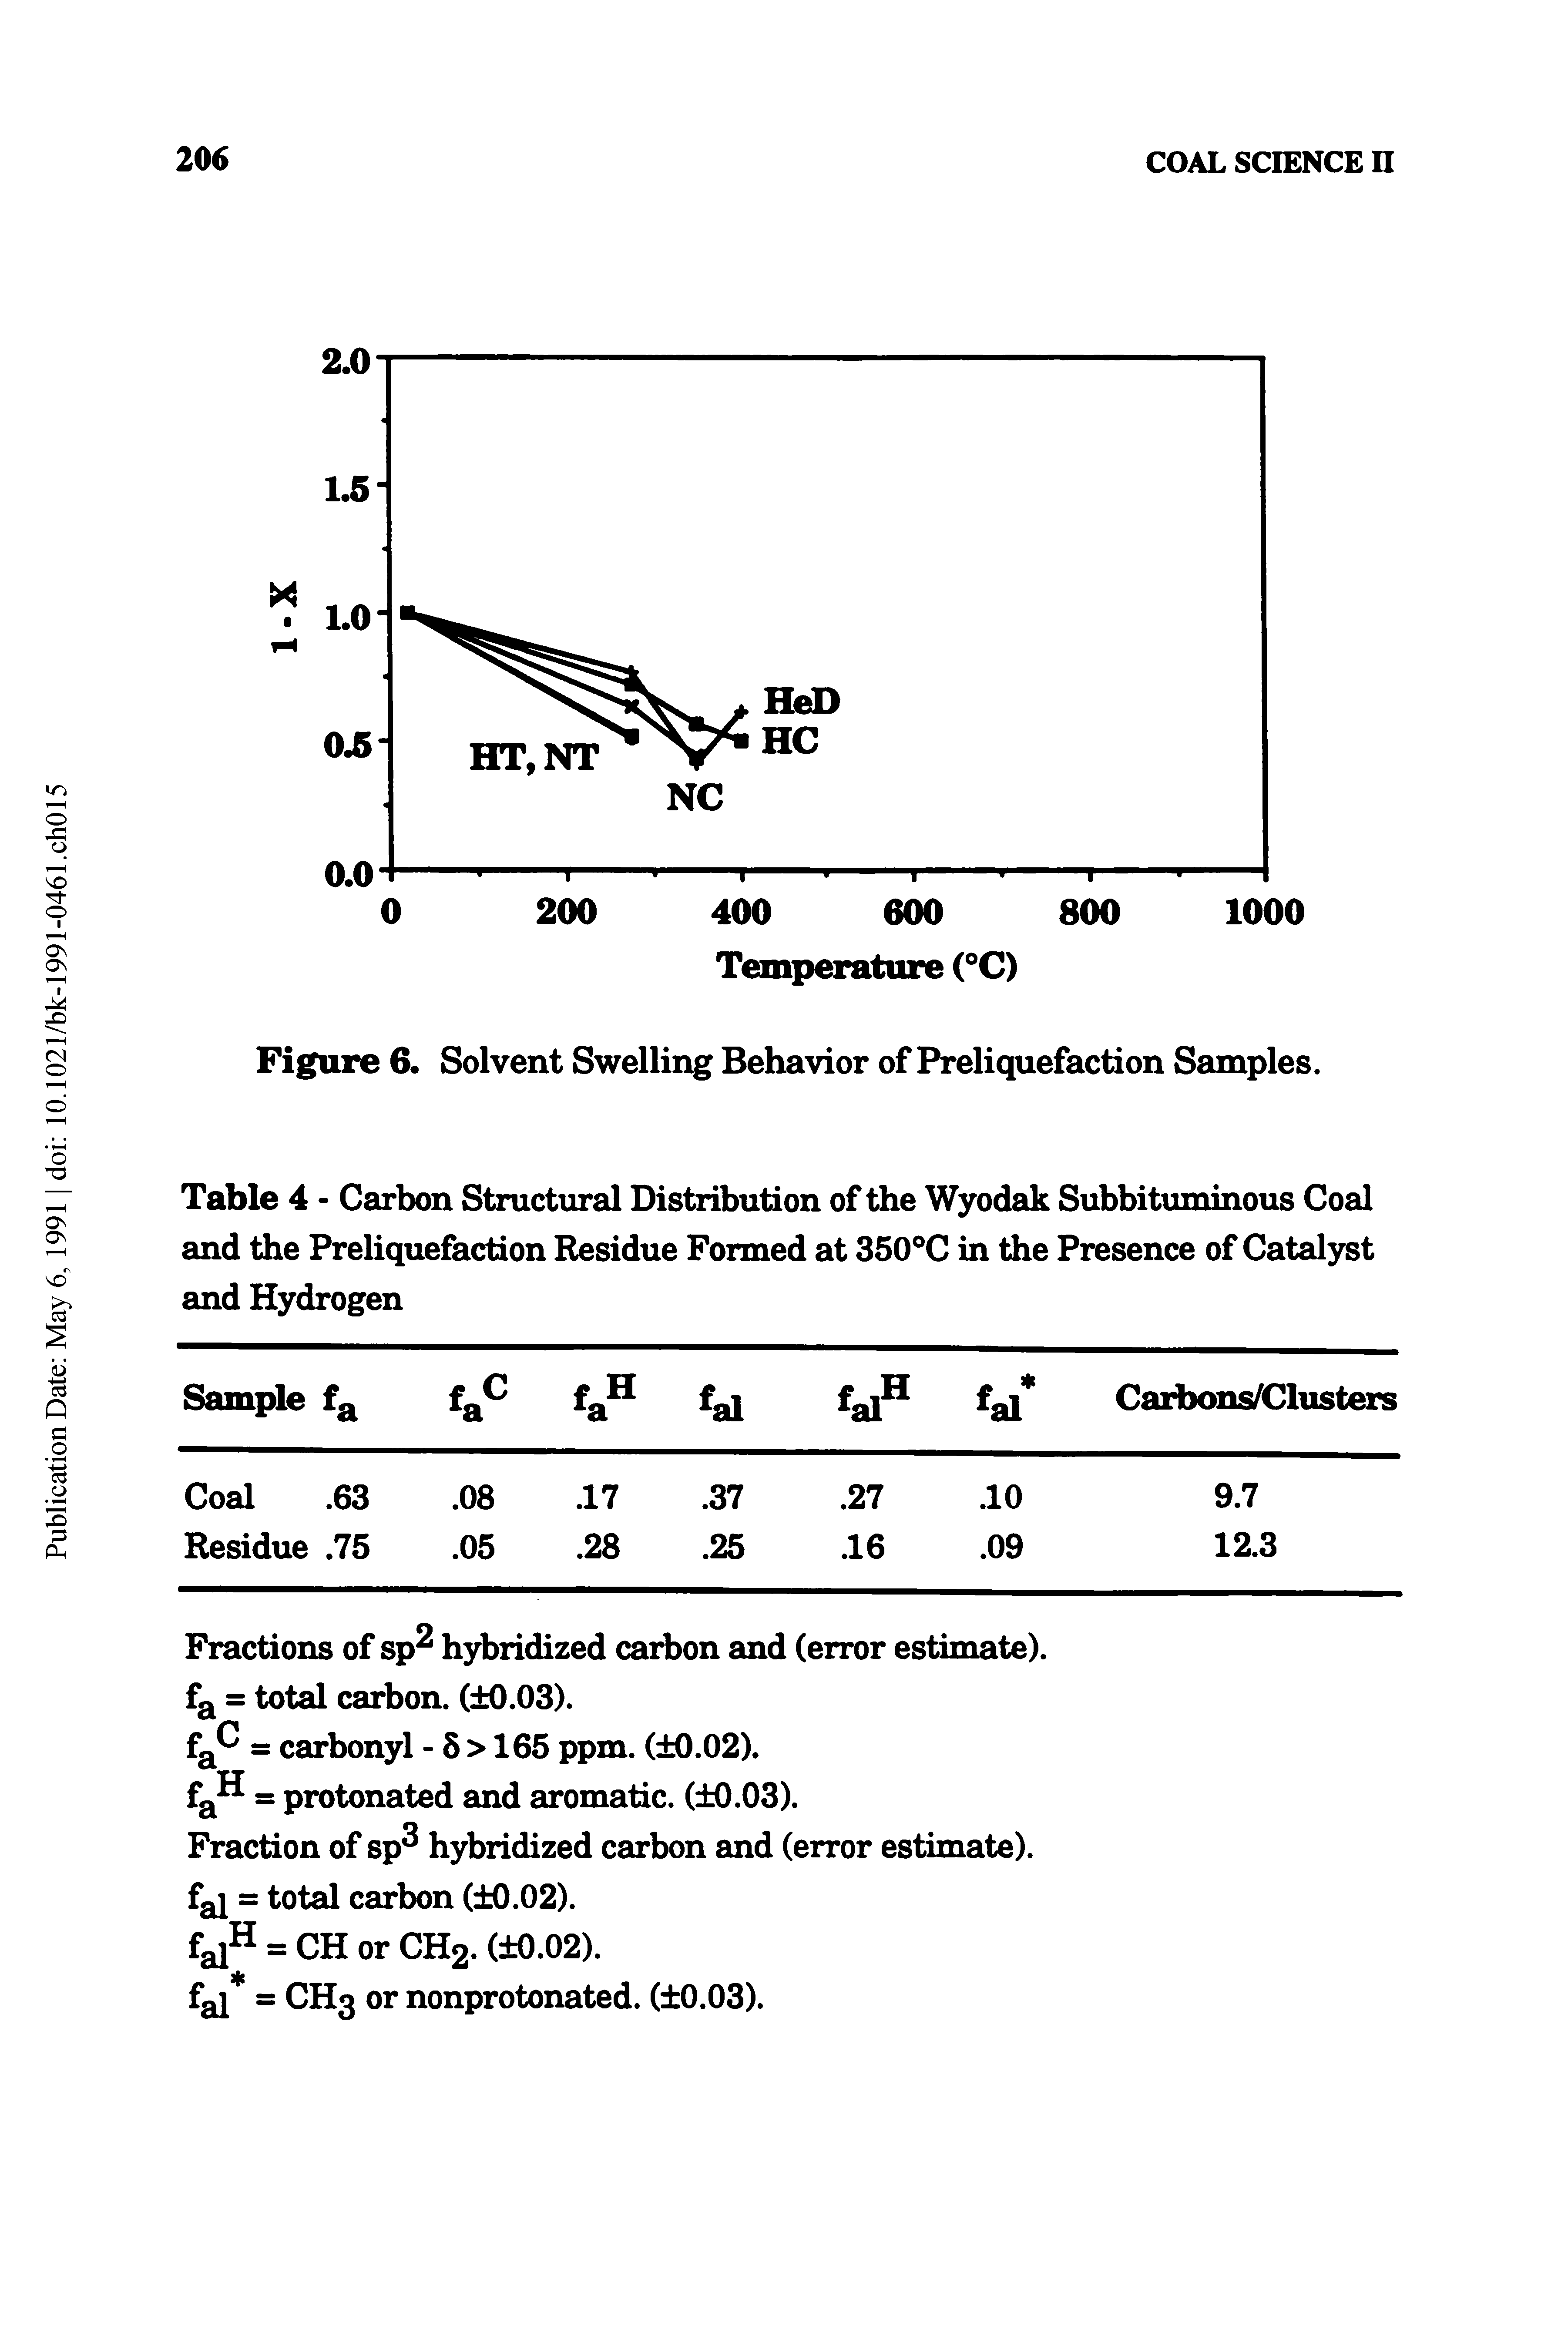 Table 4 - Carbon Structural Distribution of the Wyodak Subbituminous Coal and the Preliquefaction Residue Formed at 350°C in the Presence of Cataljrst and Hydrogen...